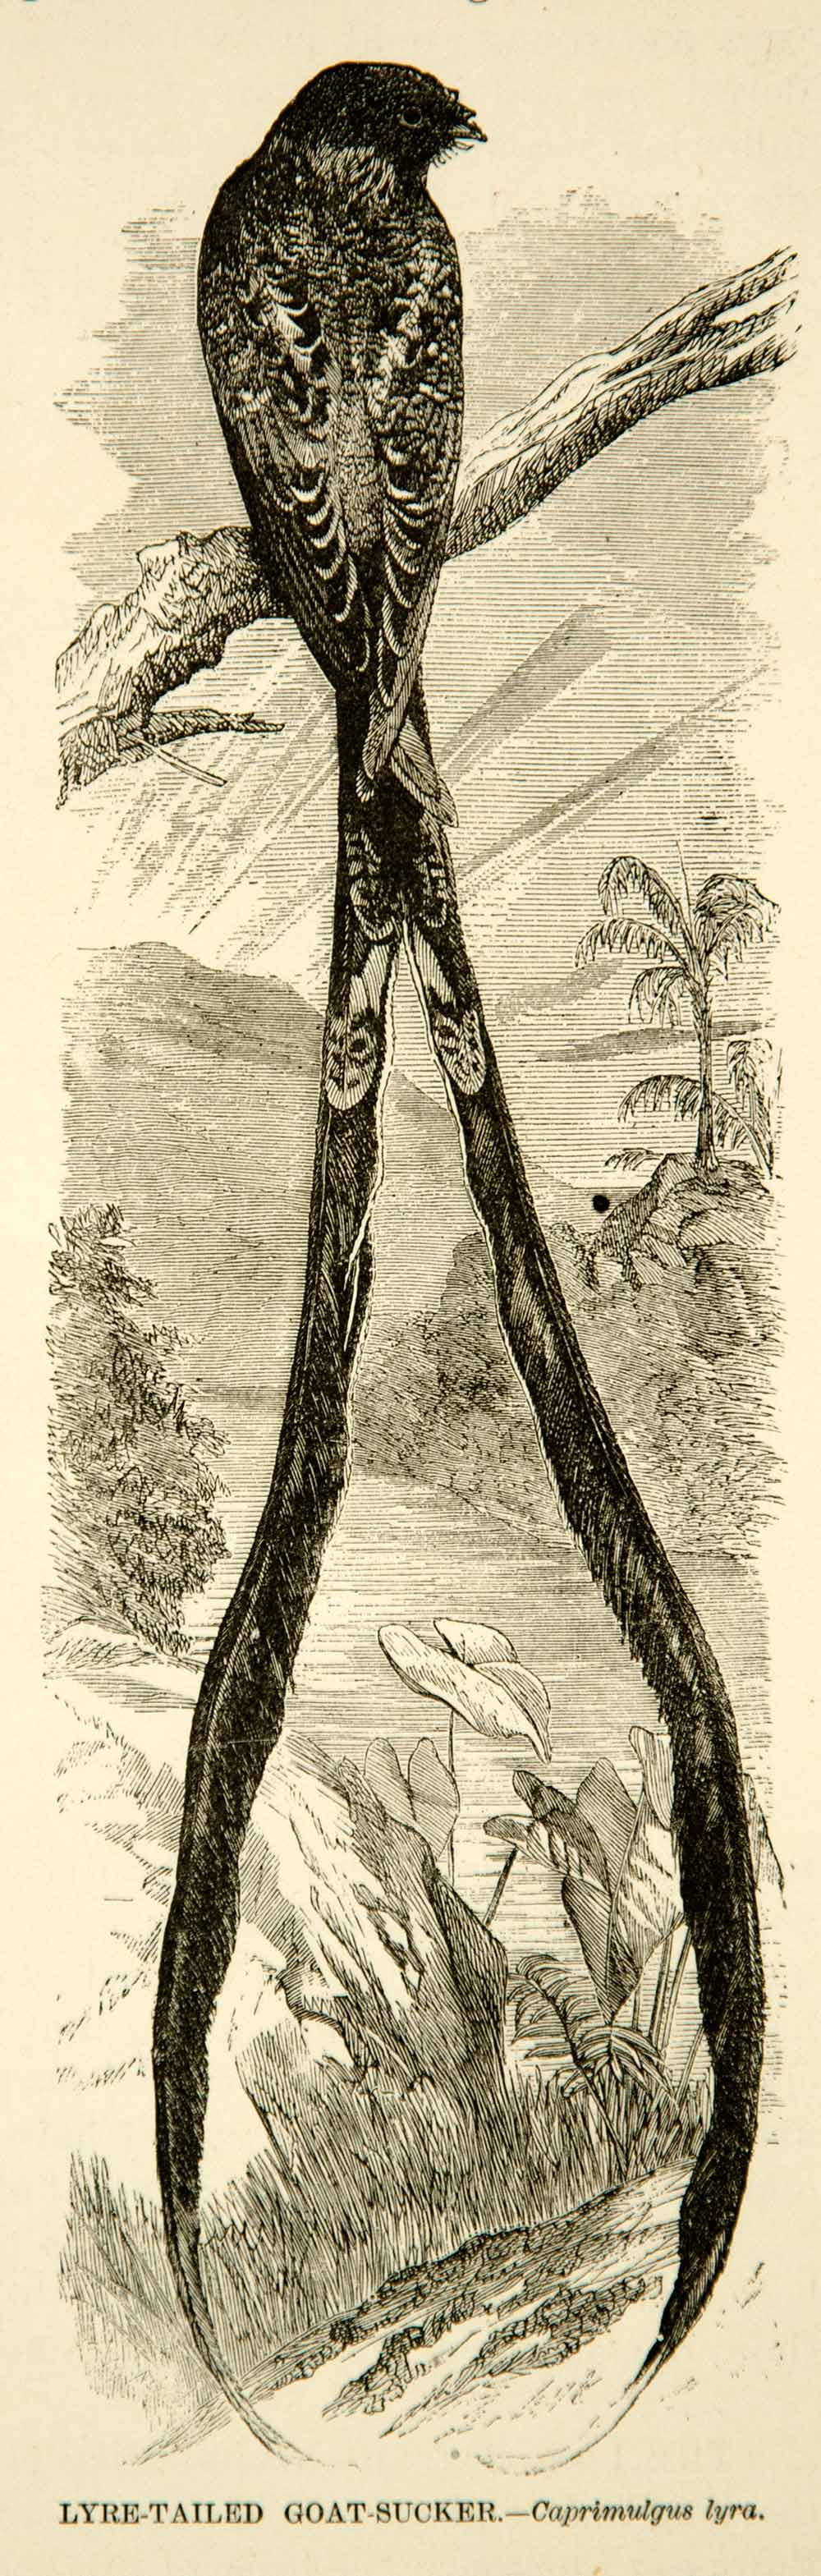 1885 Wood Engraving Lyre Tailed Goat Sucker Bird Plumage Feathers YLW1